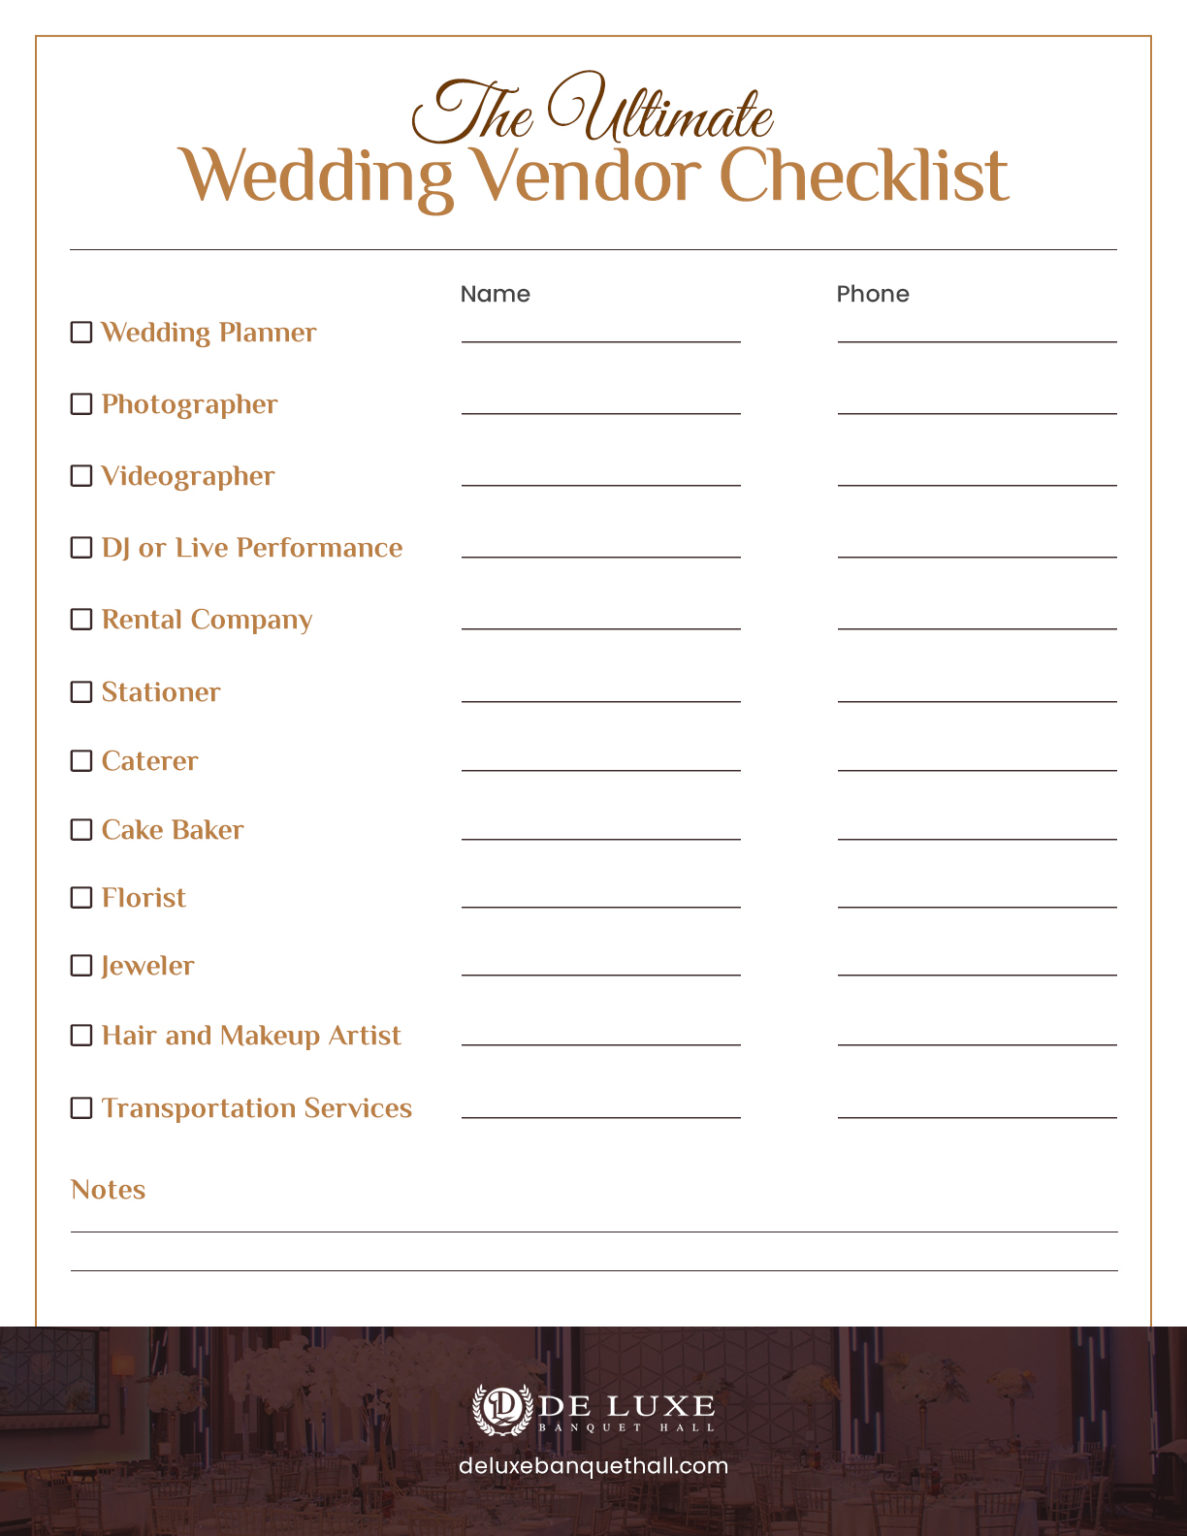 the-ultimate-wedding-vendor-checklist-for-your-big-day